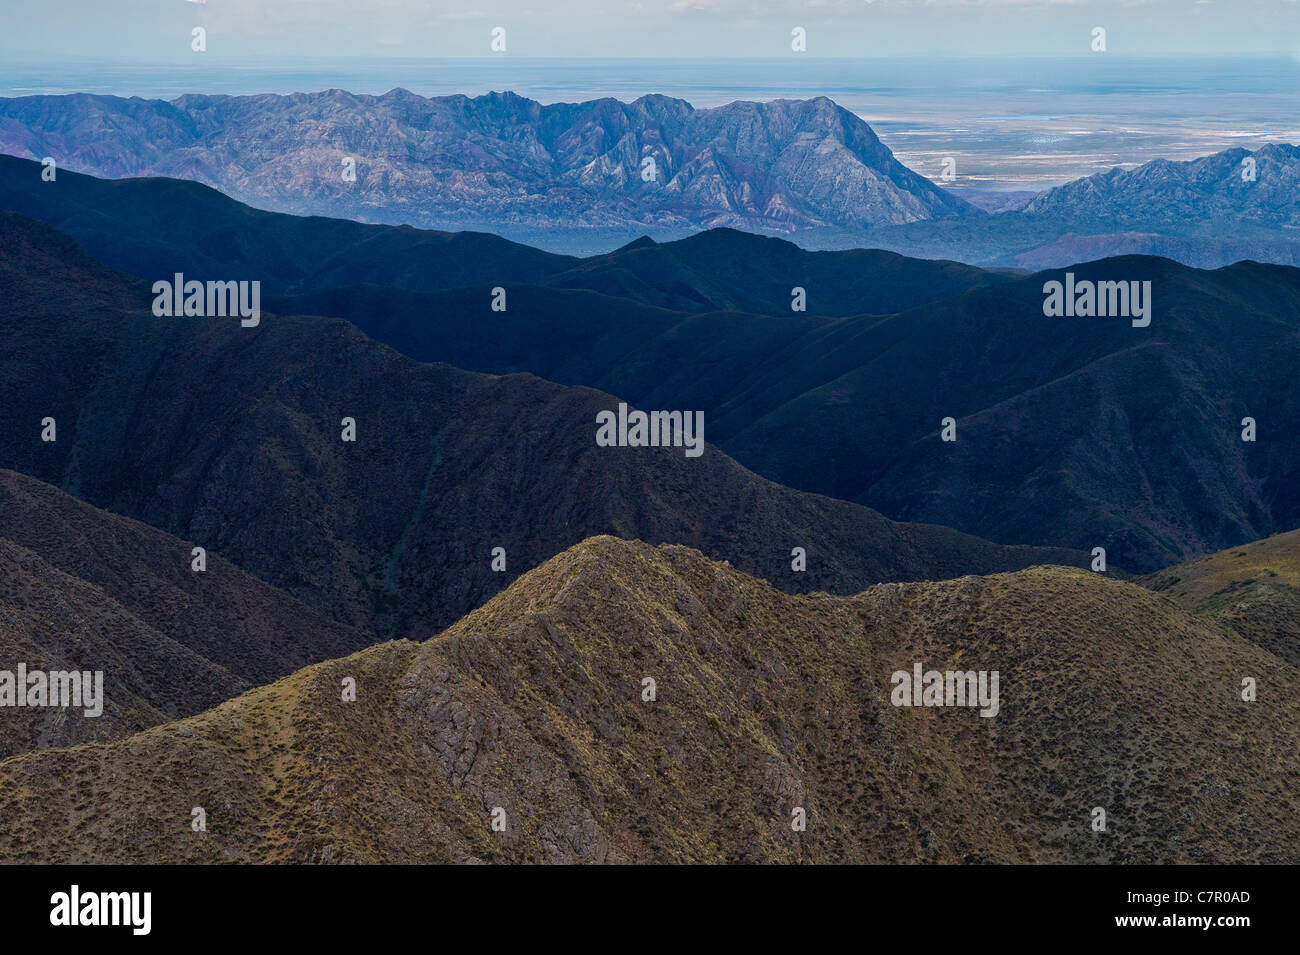 Ridges of the Andes with plains of Argentina bellow Stock Photo